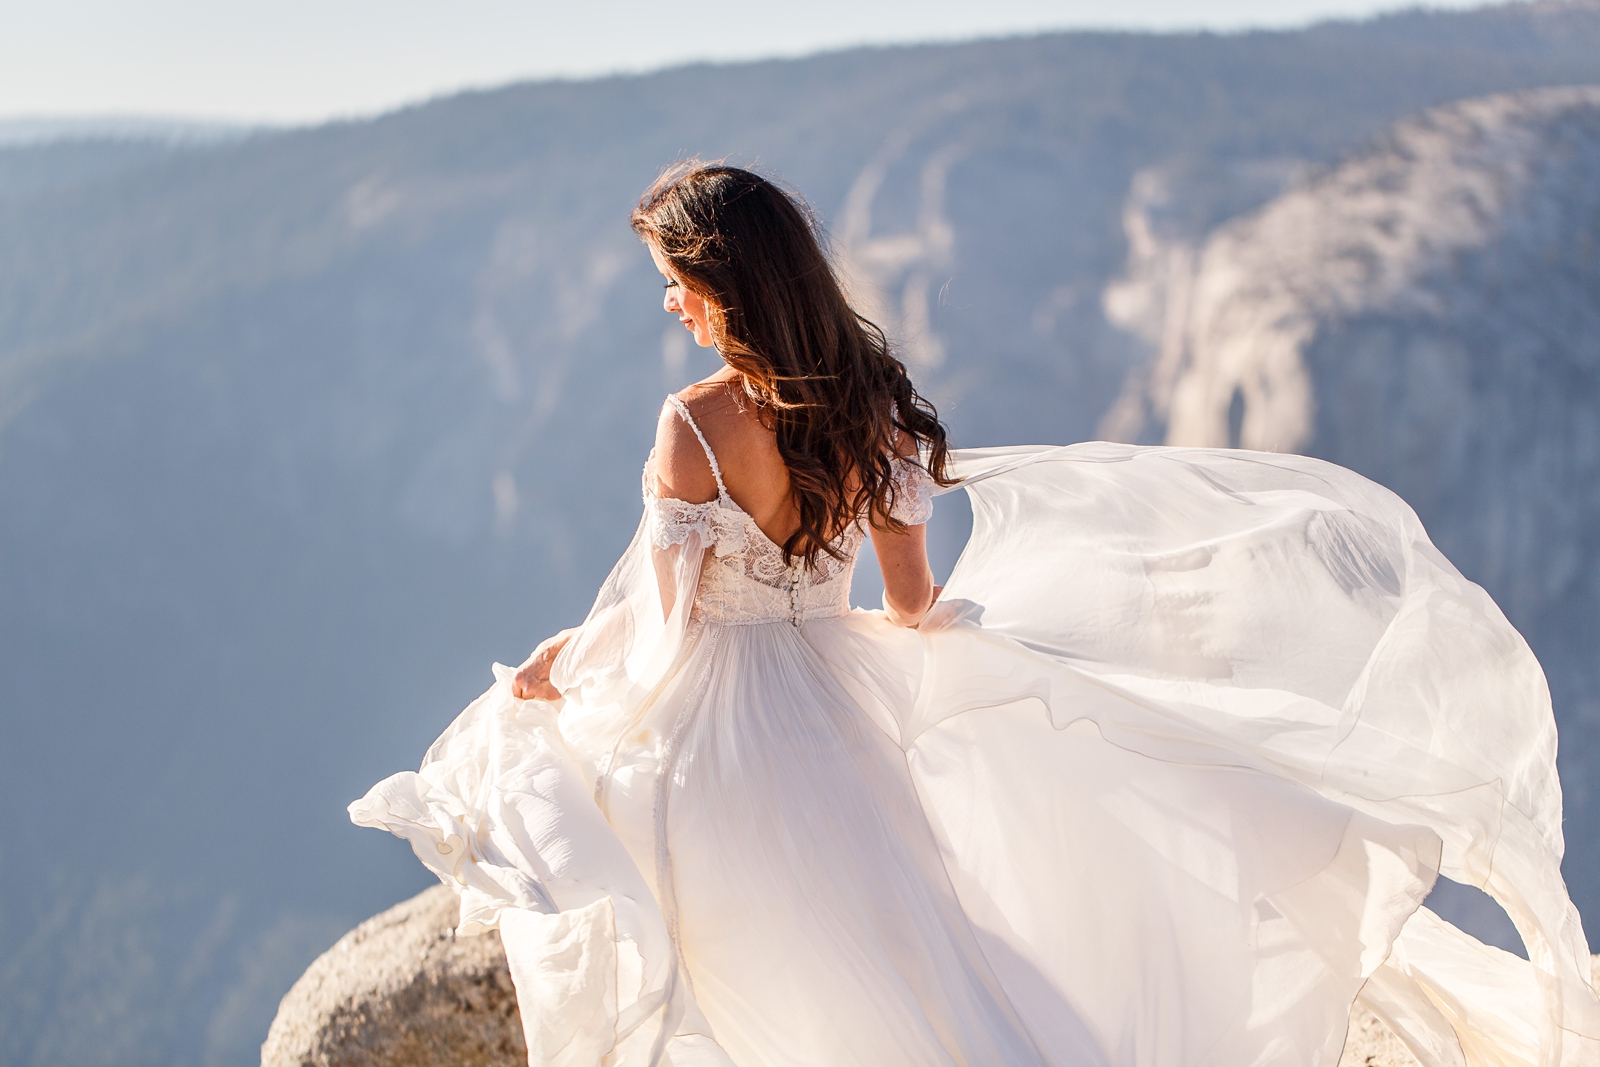 Perfect wind gust in this mountain mermaid bride's dress at Yosemite.